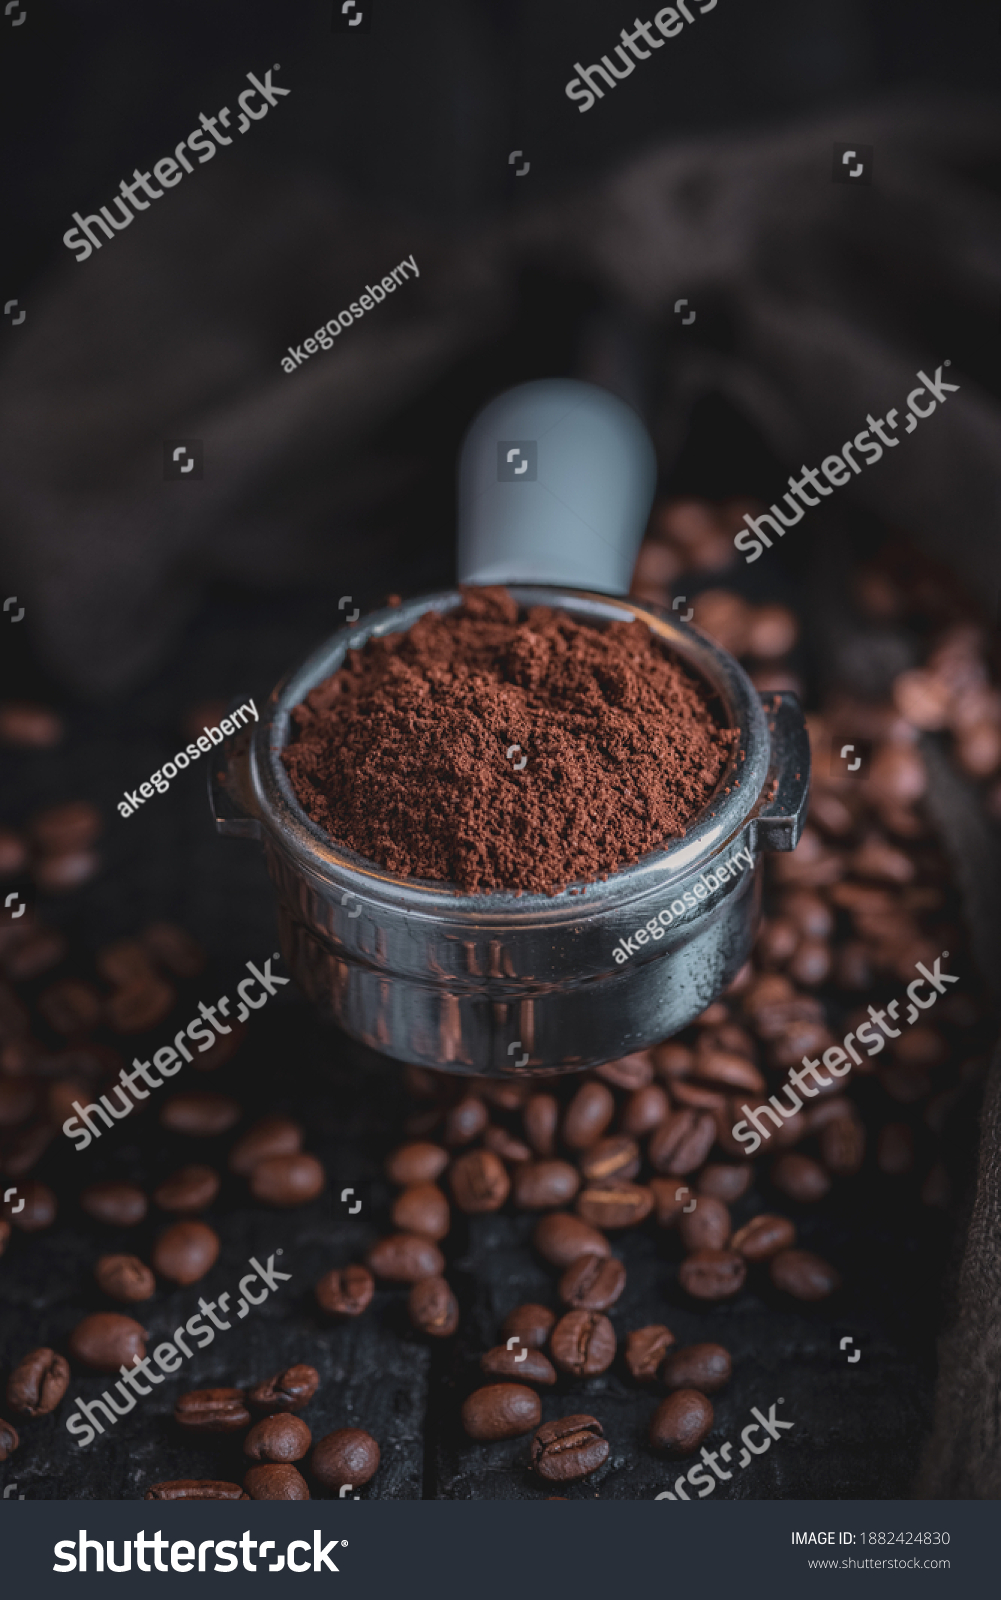 Tamped puck of coffee grounds within basket of portafilter and coffee beans spilled around in a dark and moody scene of natural light. #1882424830